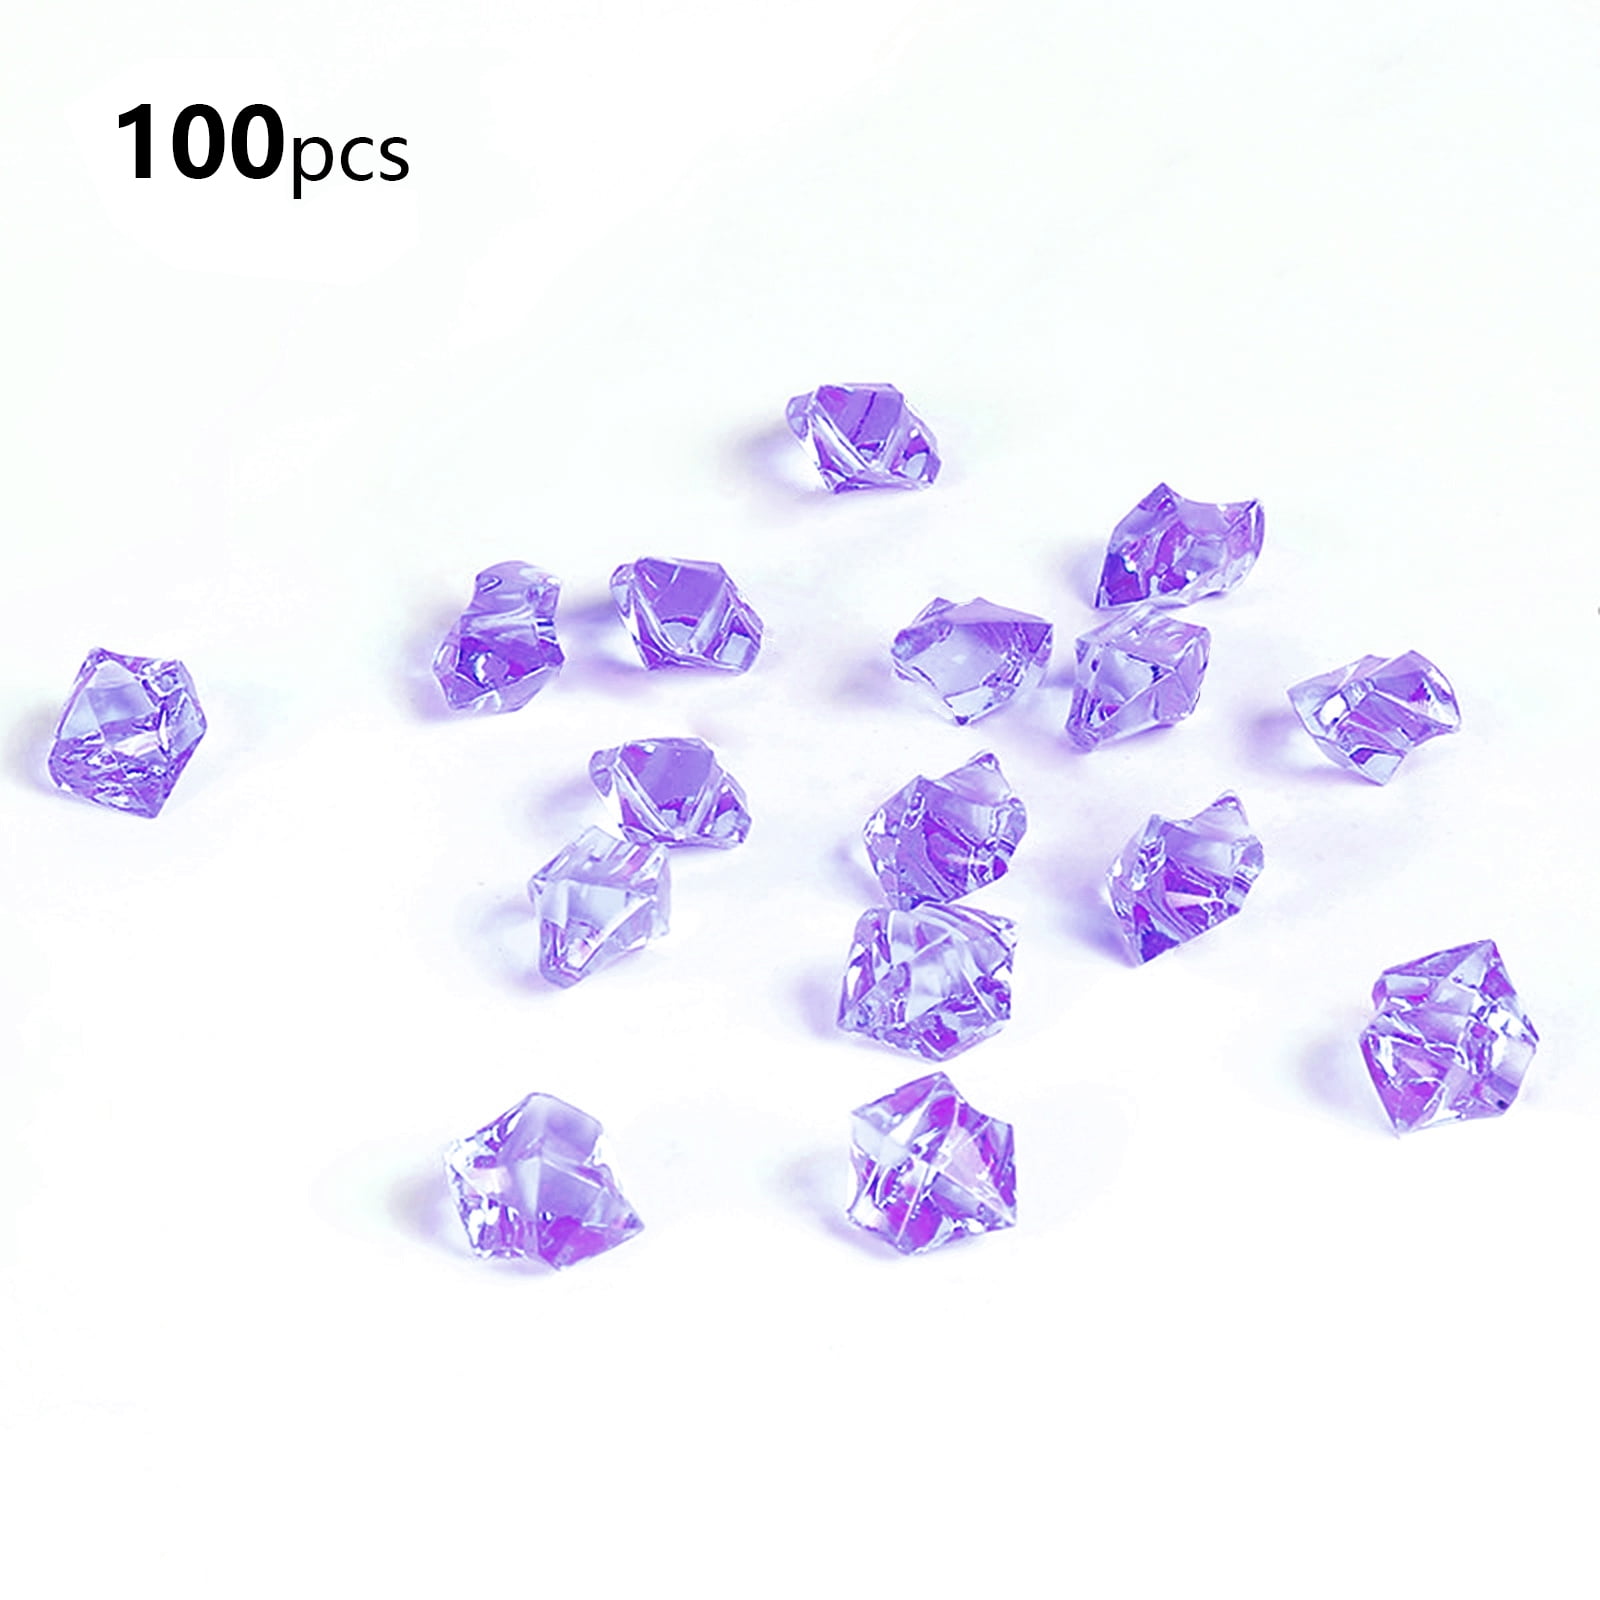 Black Acrylic Crystals Diamond gems Beads for Craft Decoration Weddding Table Scattering Birthday Deco TeeLiy 1000pcs 0.4inch Fake Plastic Diamonds for Vase Fillers Table Scatters 